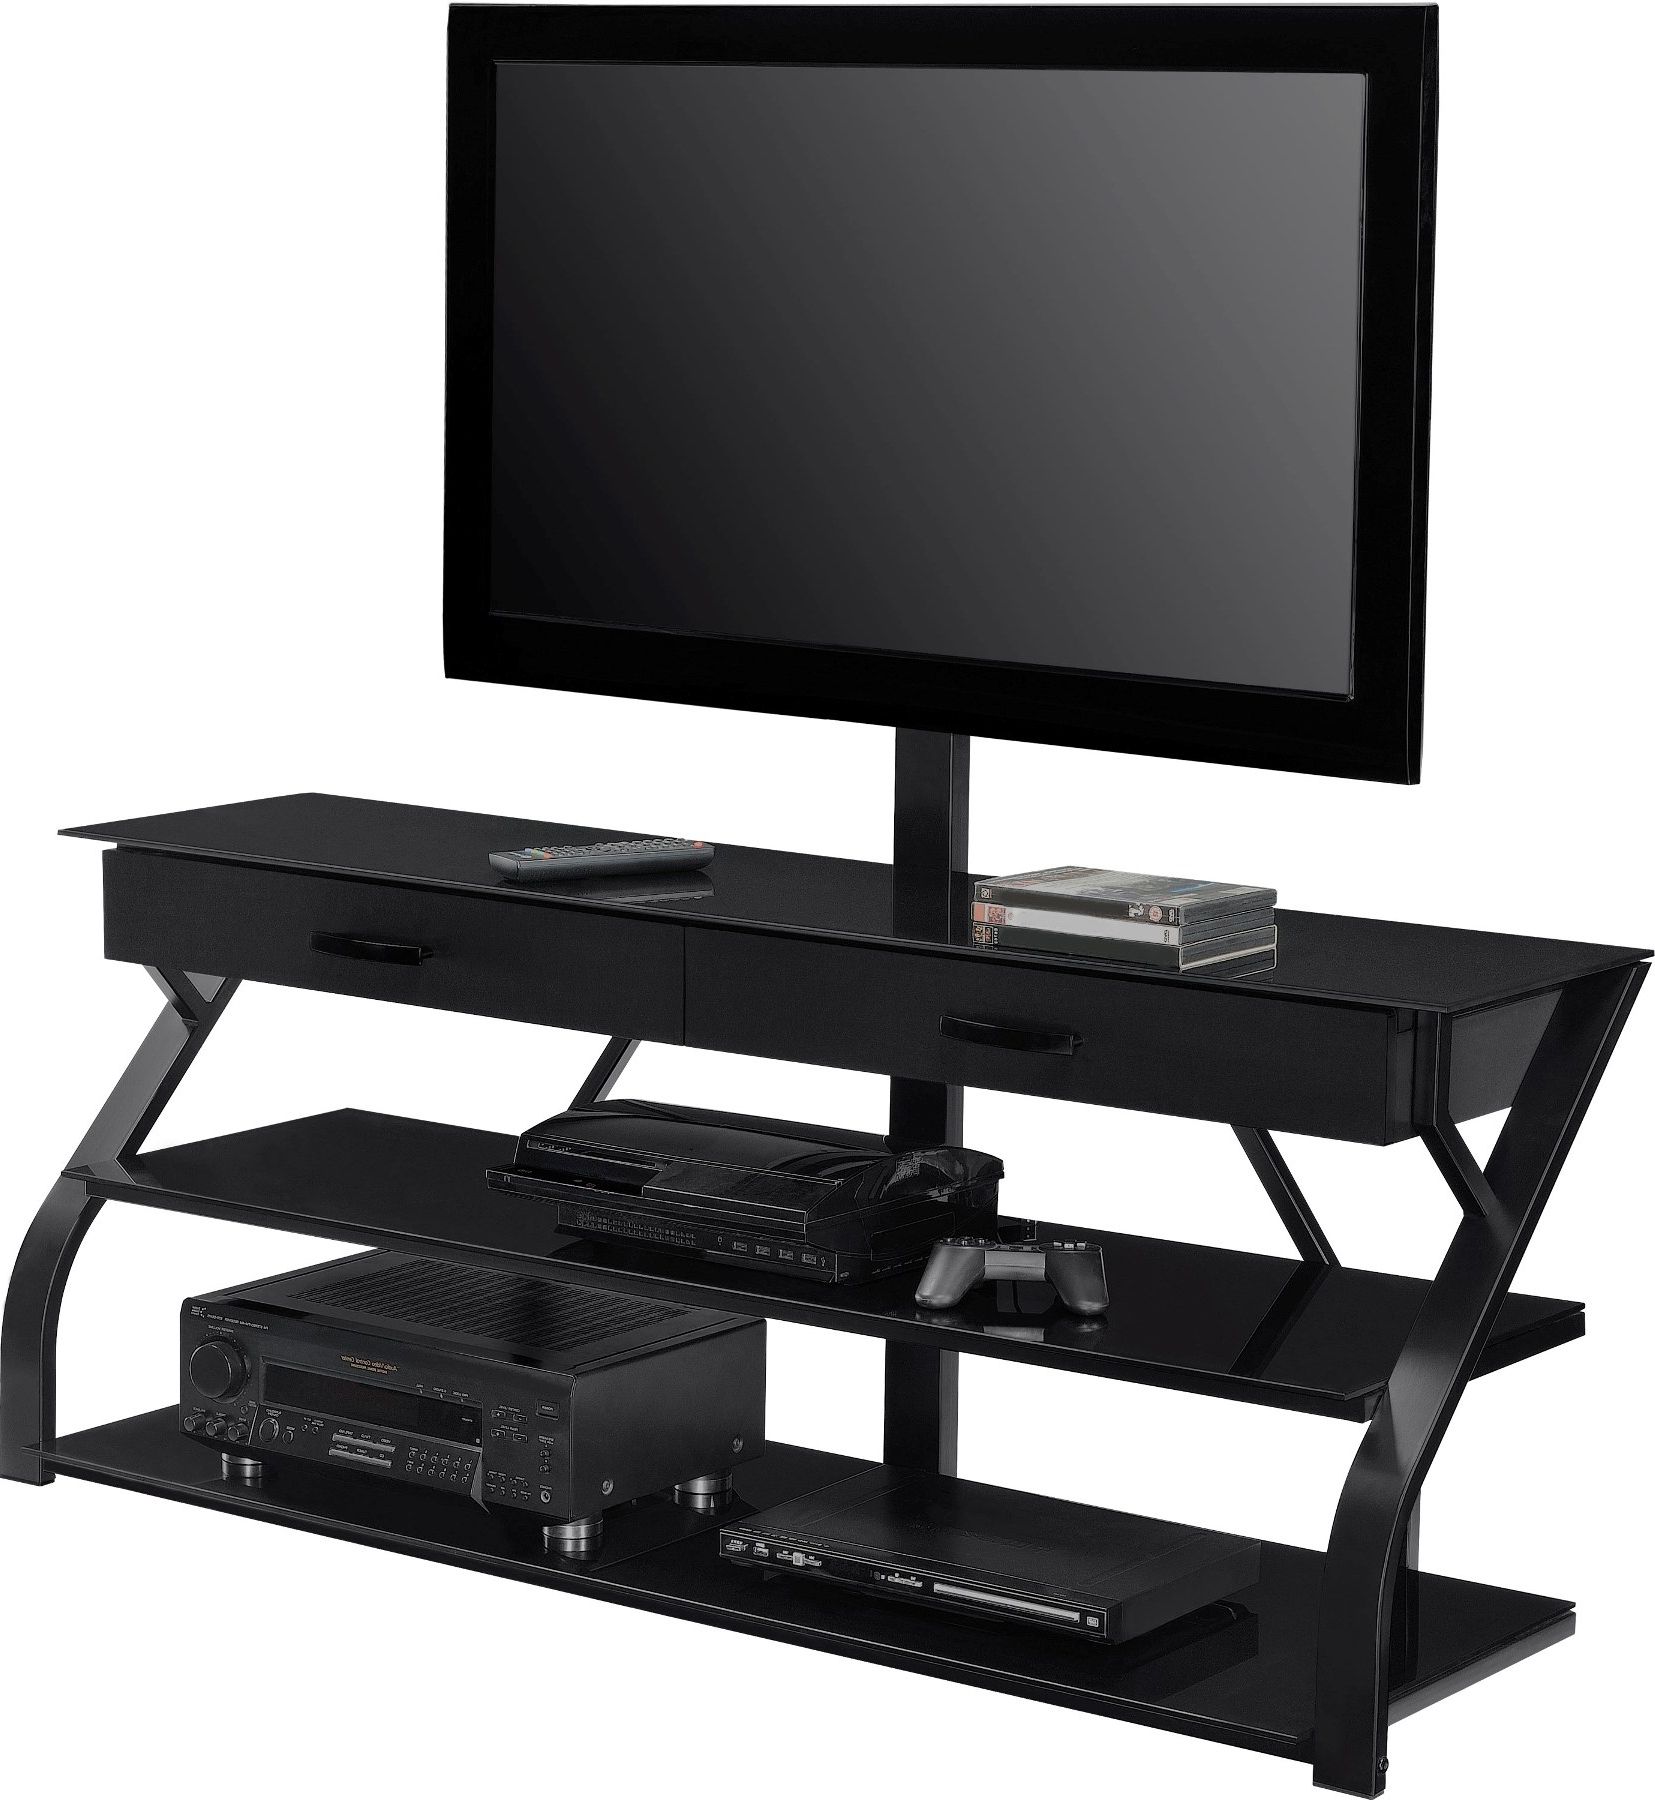 Swivel Black Glass Tv Stands Intended For Latest Black Glass Storage Tv Stand With Mount Of A Gallery Of Trendy Glass 